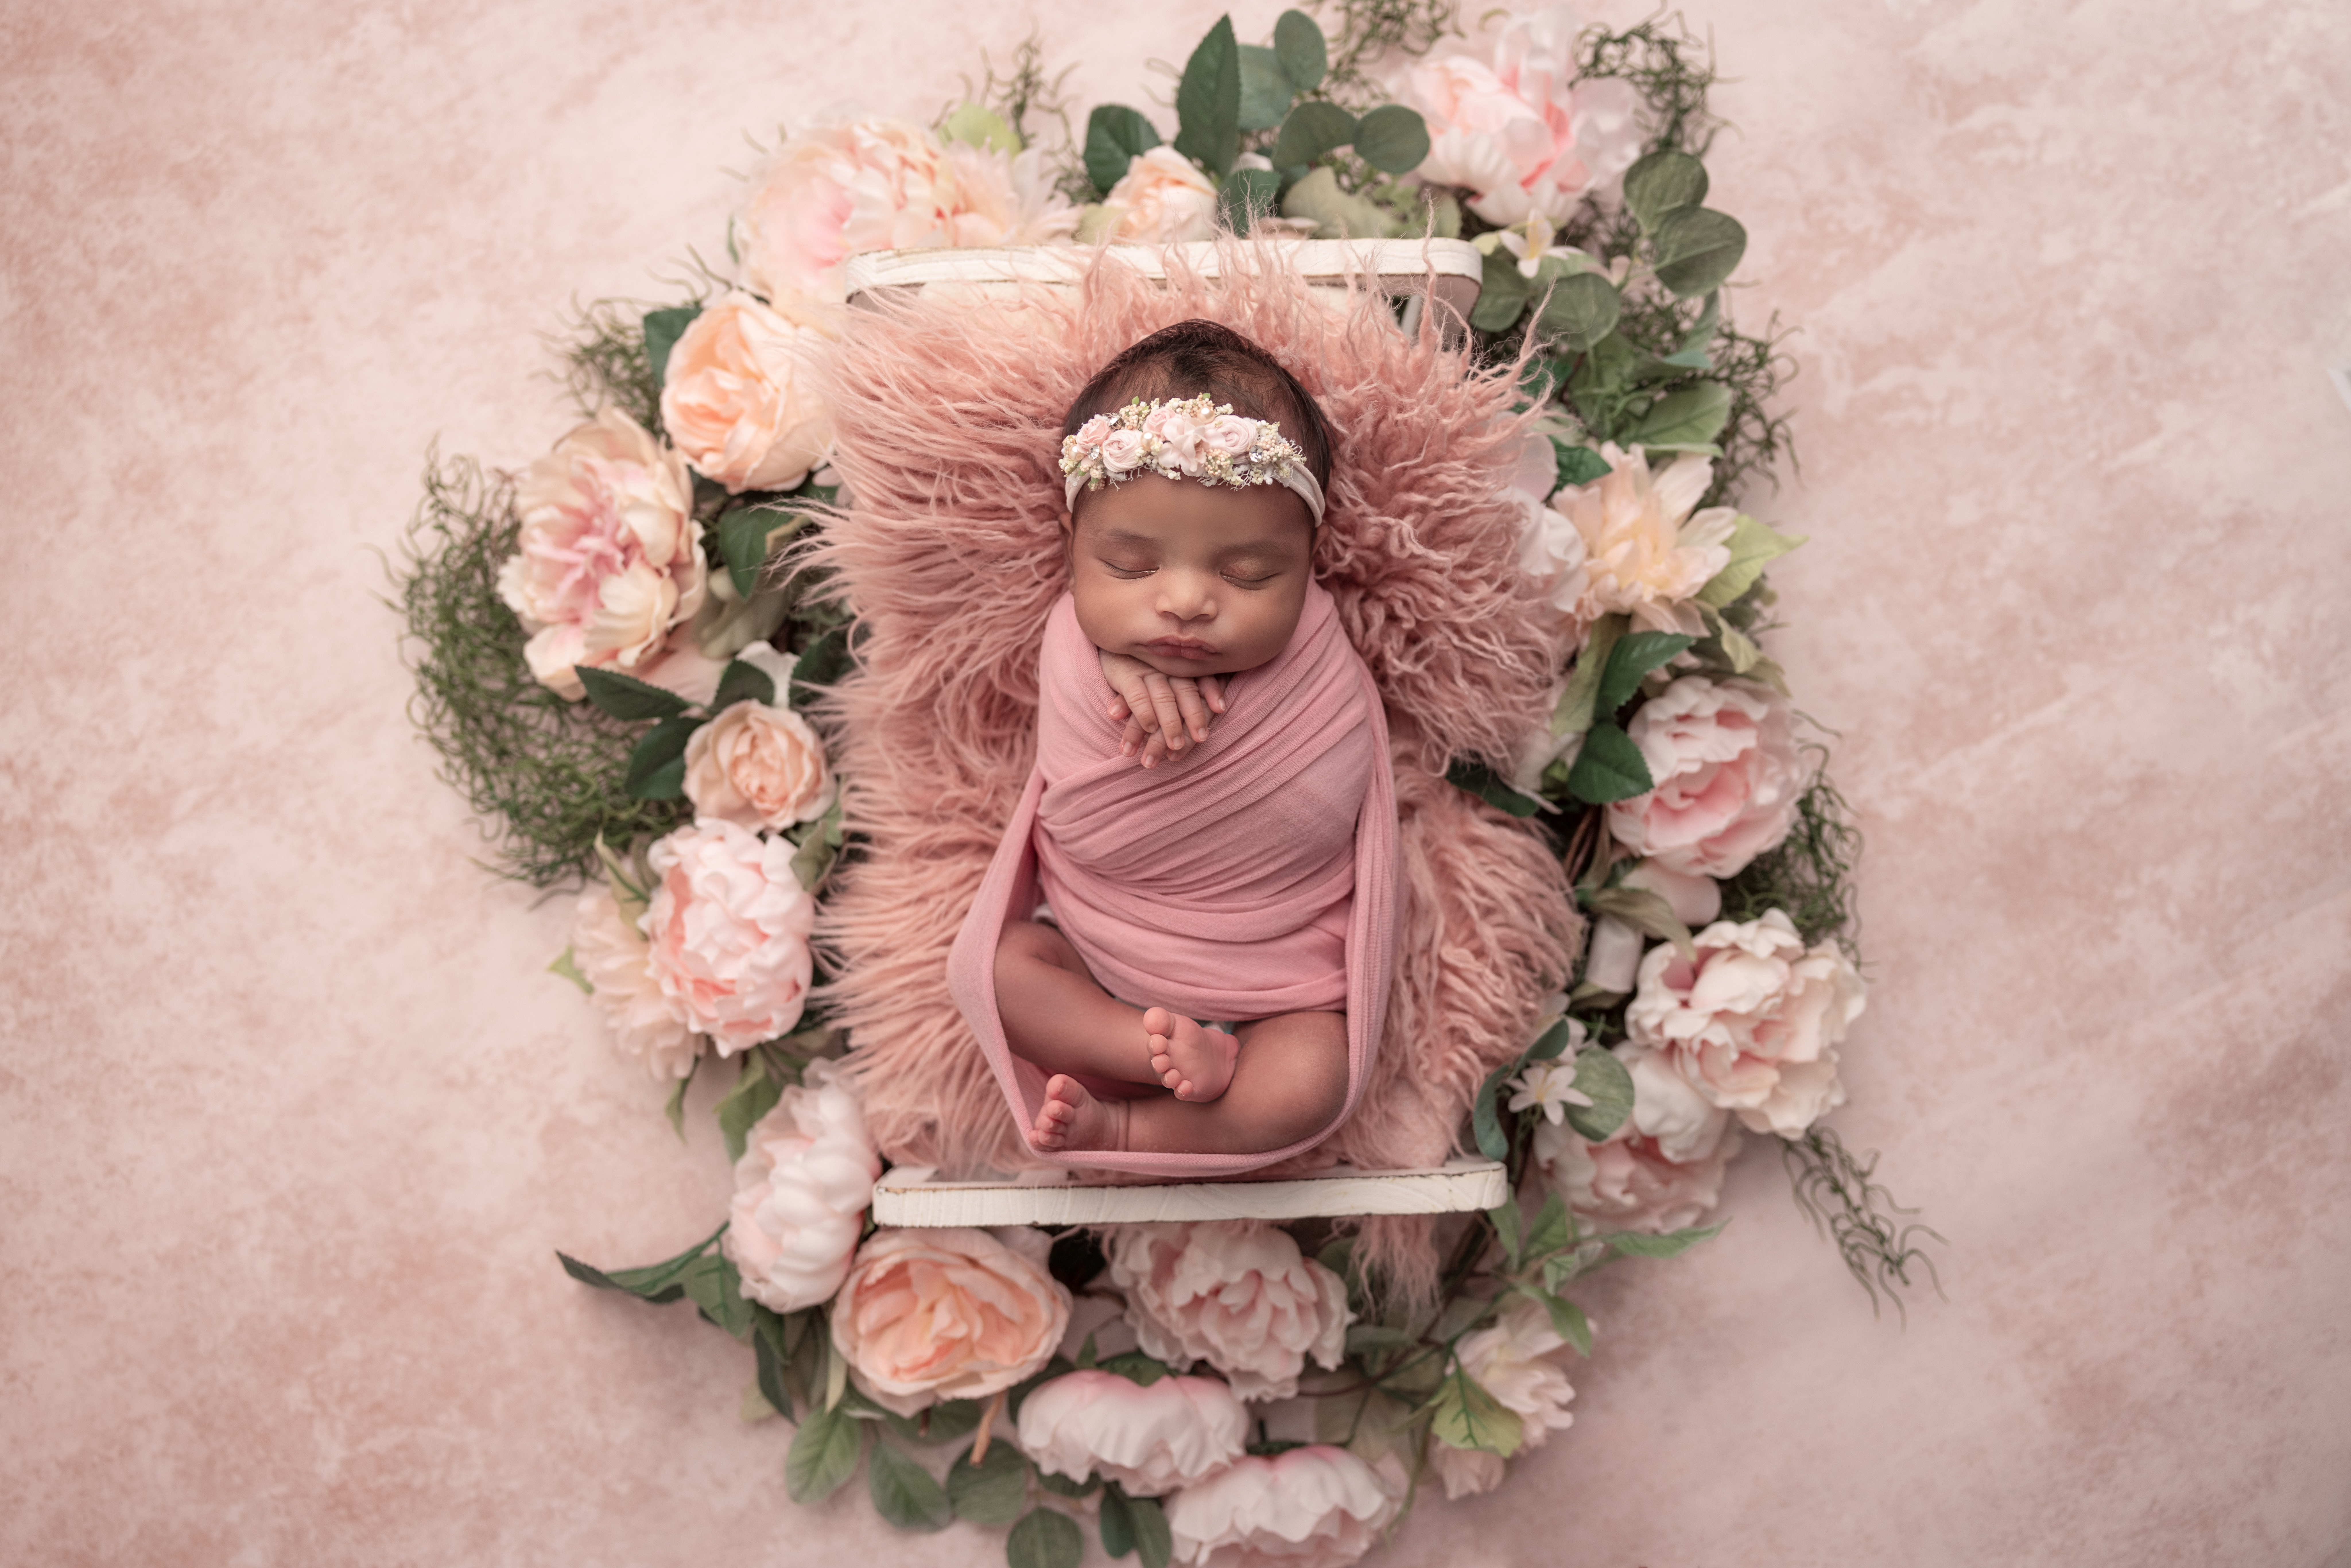 Baby girl wrapped in pink lying on a baby bed with beautiful florals around the bed